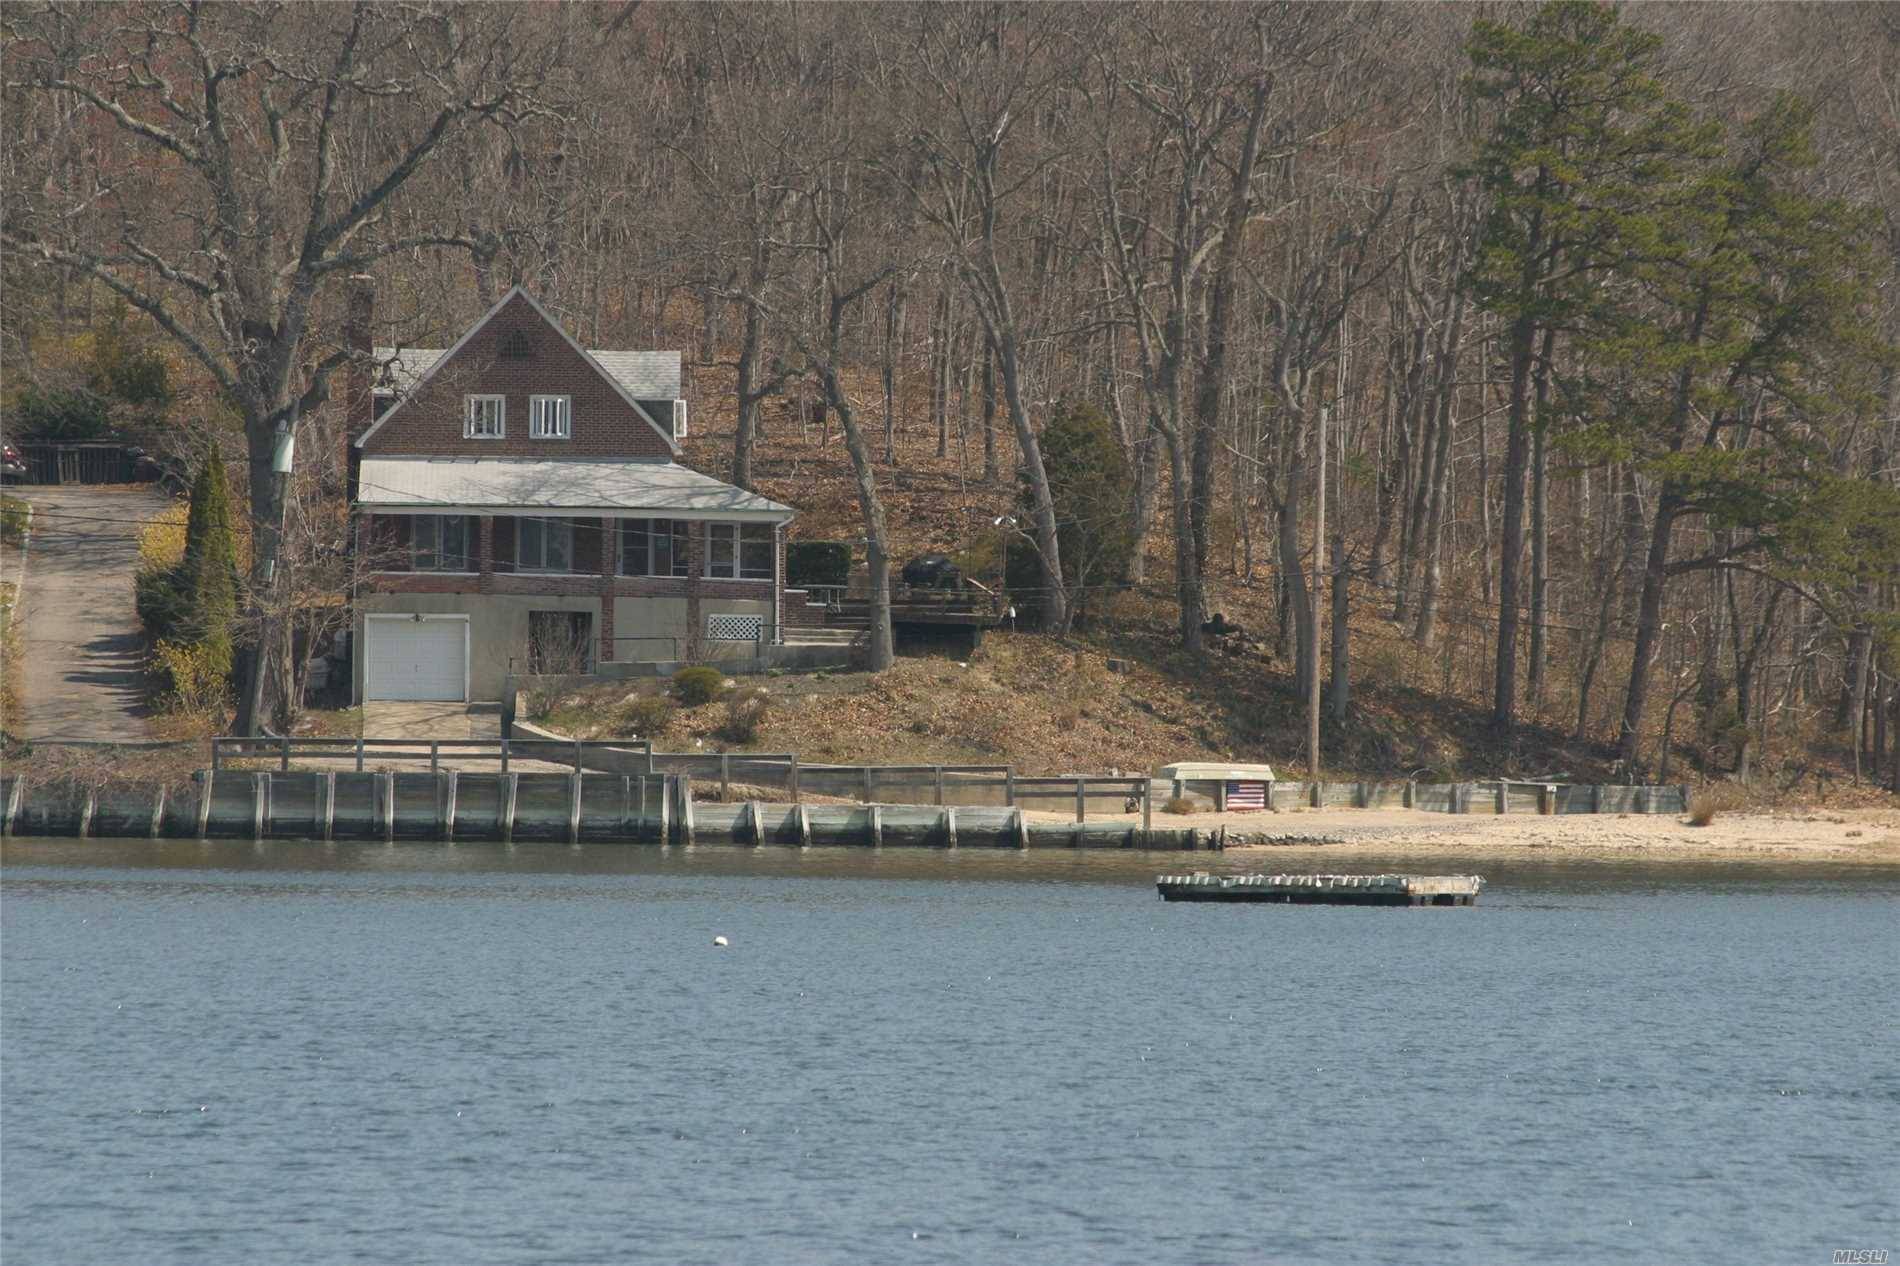 Rare Opportunity To Renovate/Expand/Build New Waterfront Home- Panoramic Western Views Of Centerport Harbor.